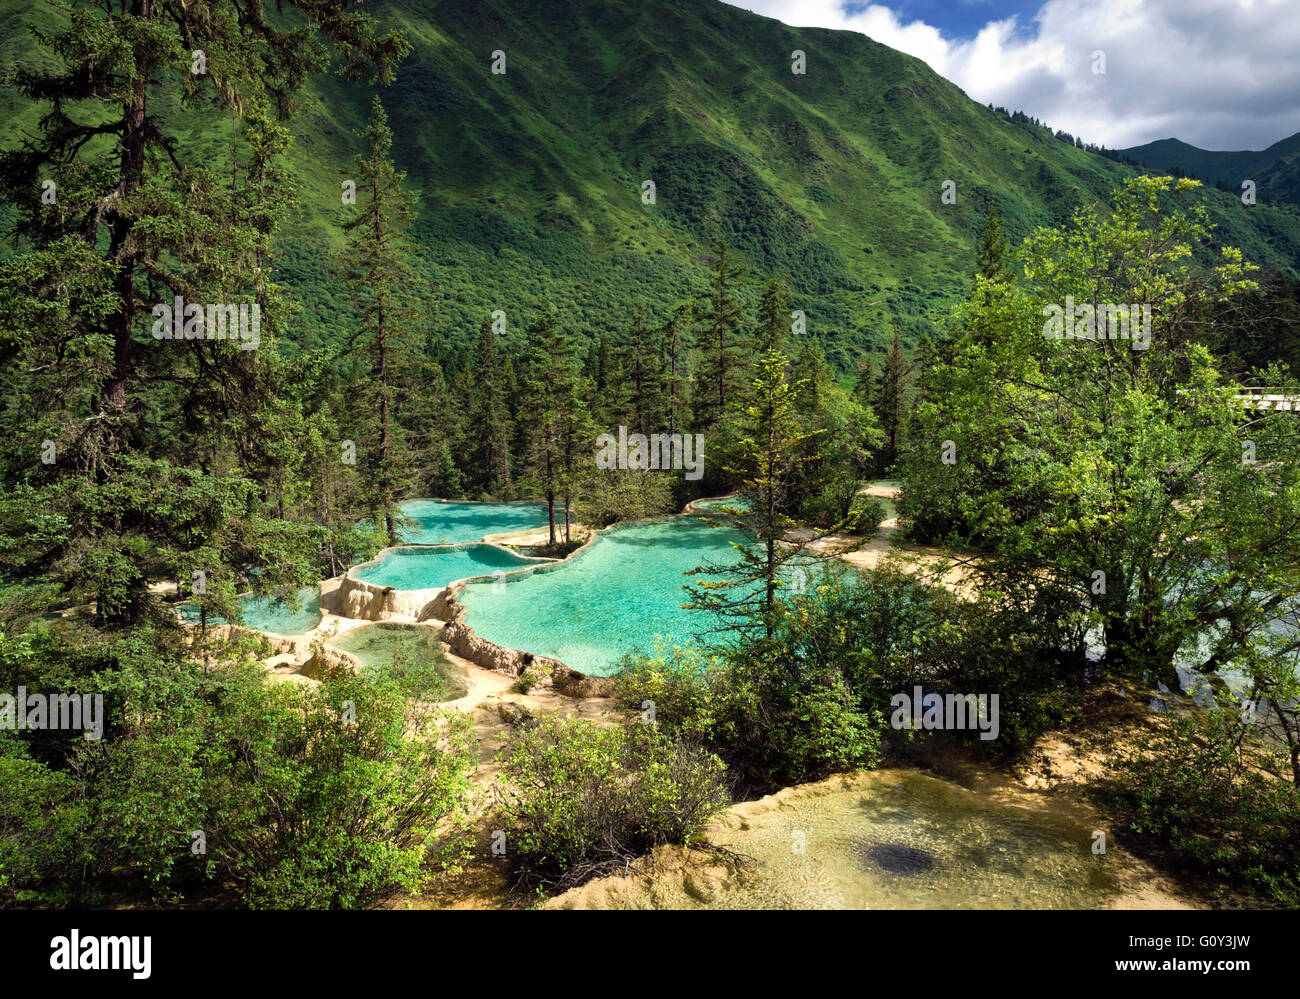 Travertine landscape and Colorful pools, Huanglong Scenic and Historic Interest Area, Sichuan, China Stock Photo